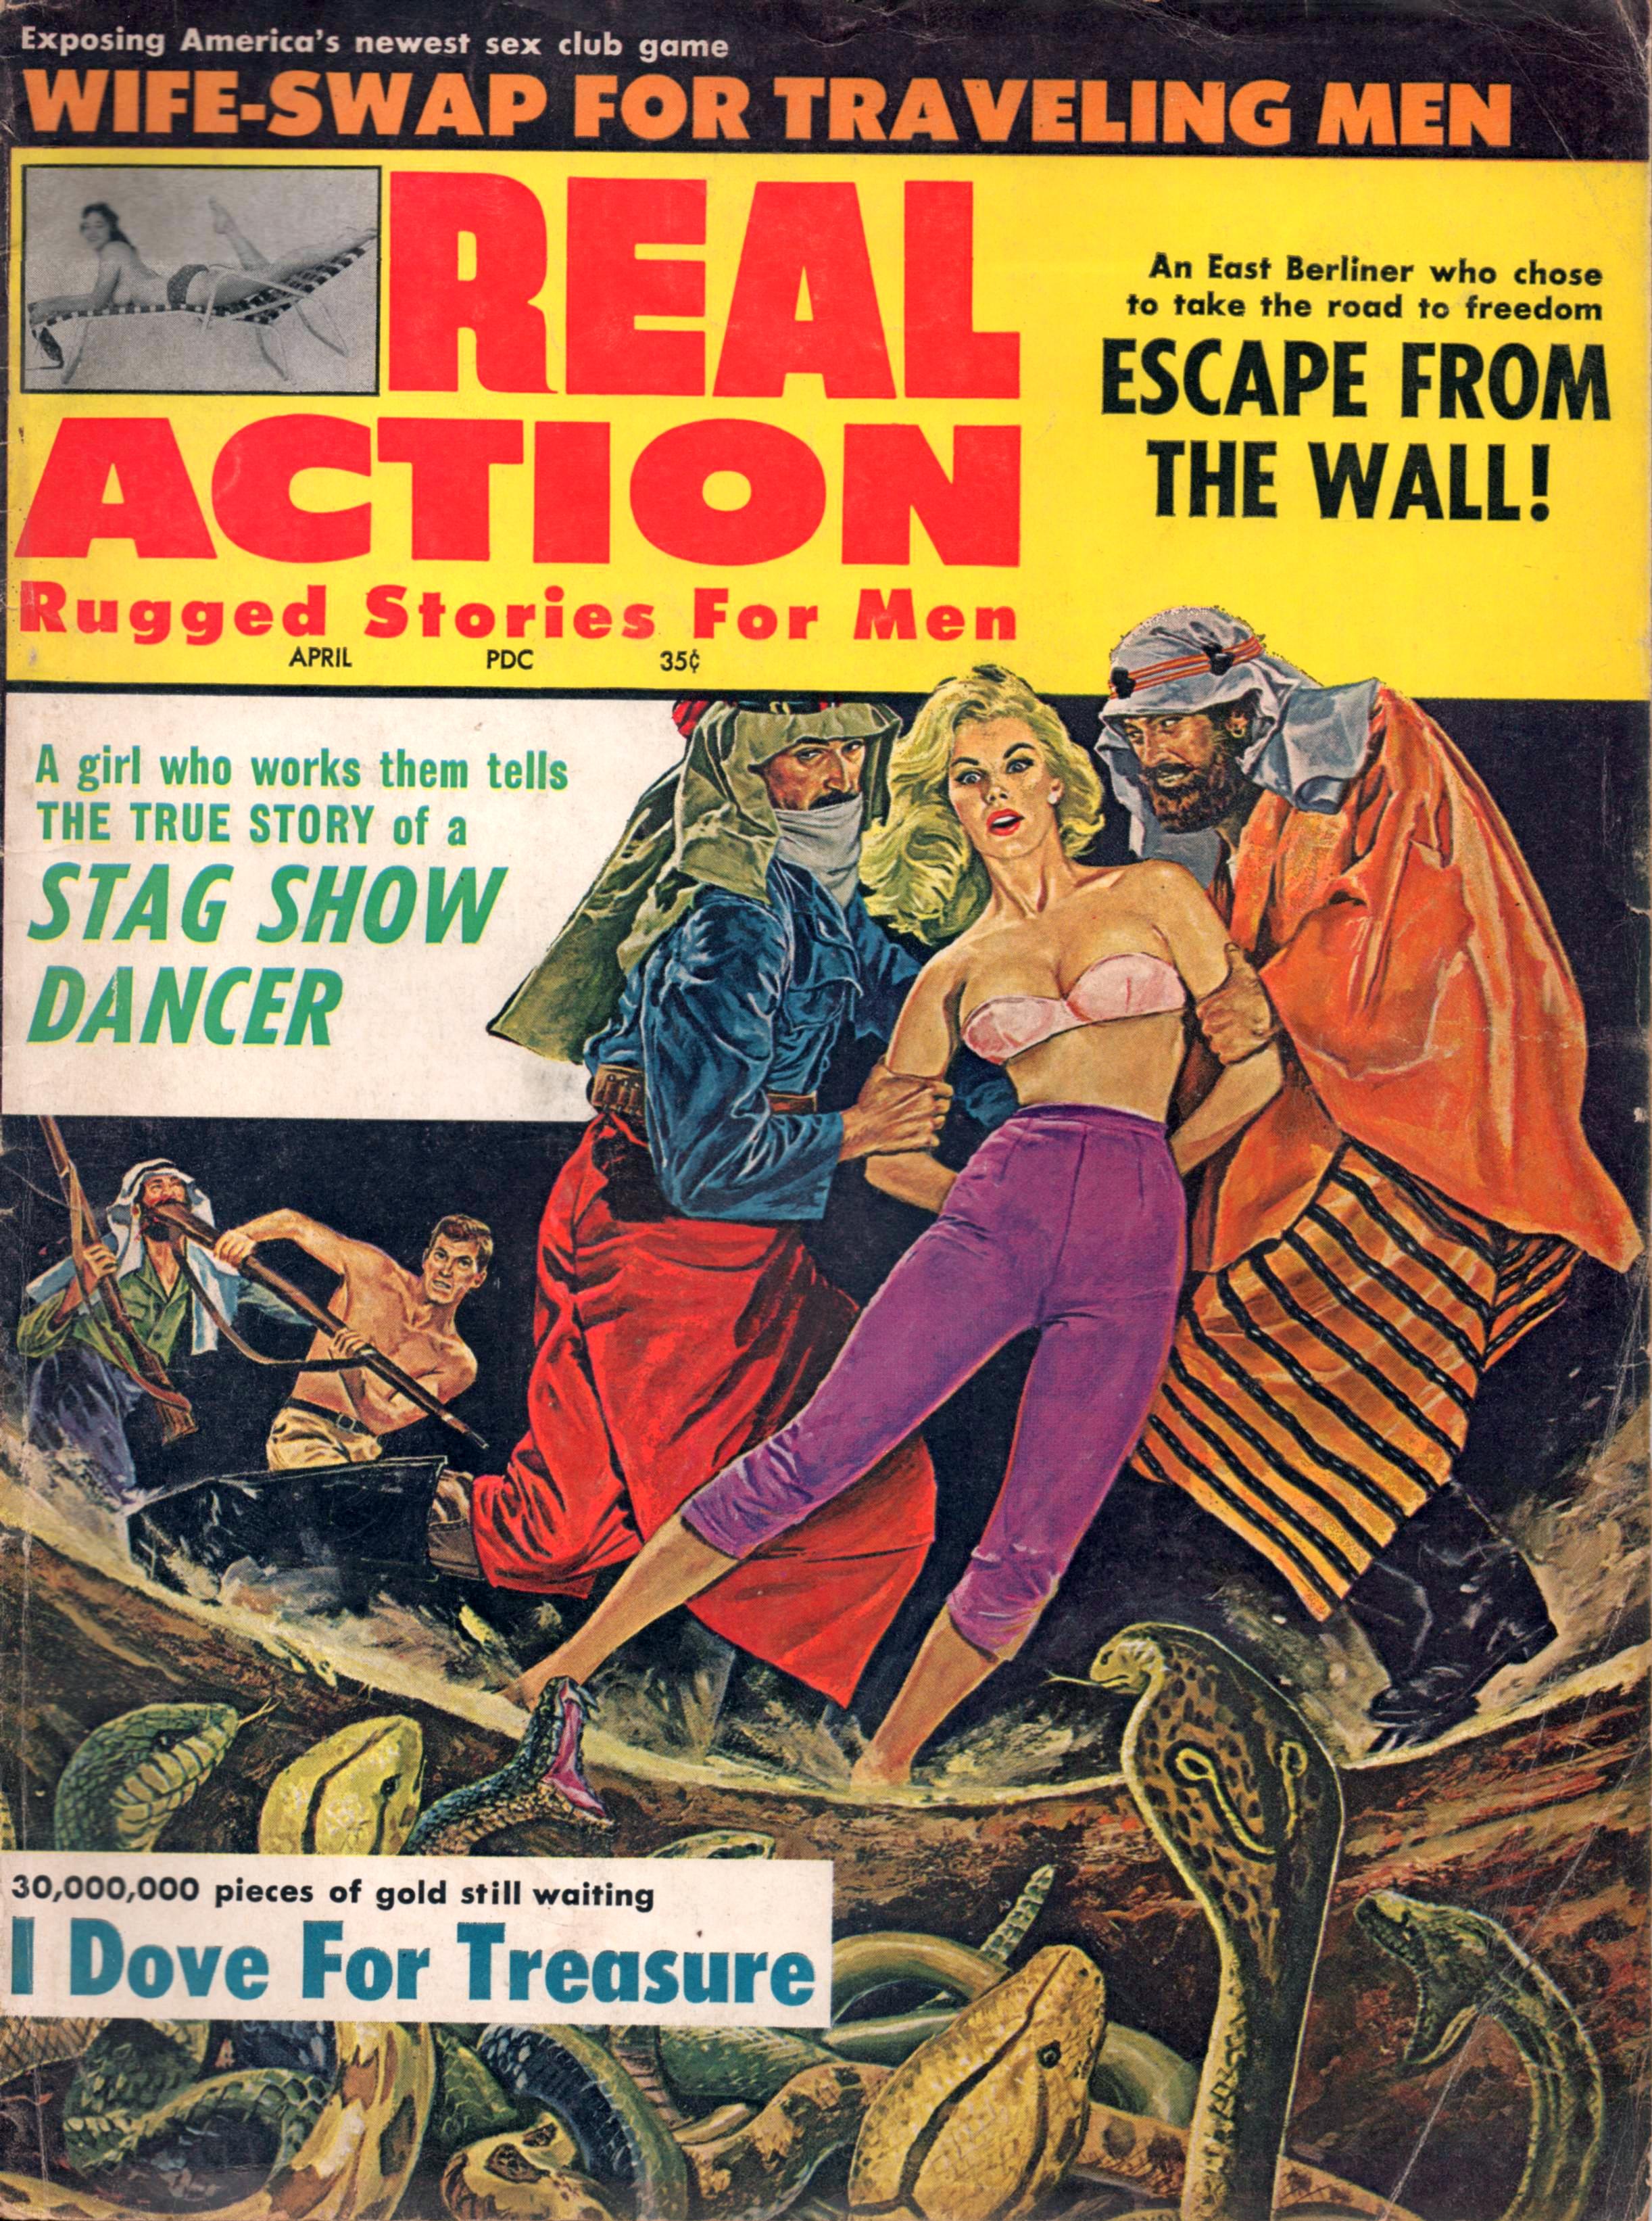 Are American Men Sex Failures / Wife-Swap For Traveling Men -- Pulp Covers picture